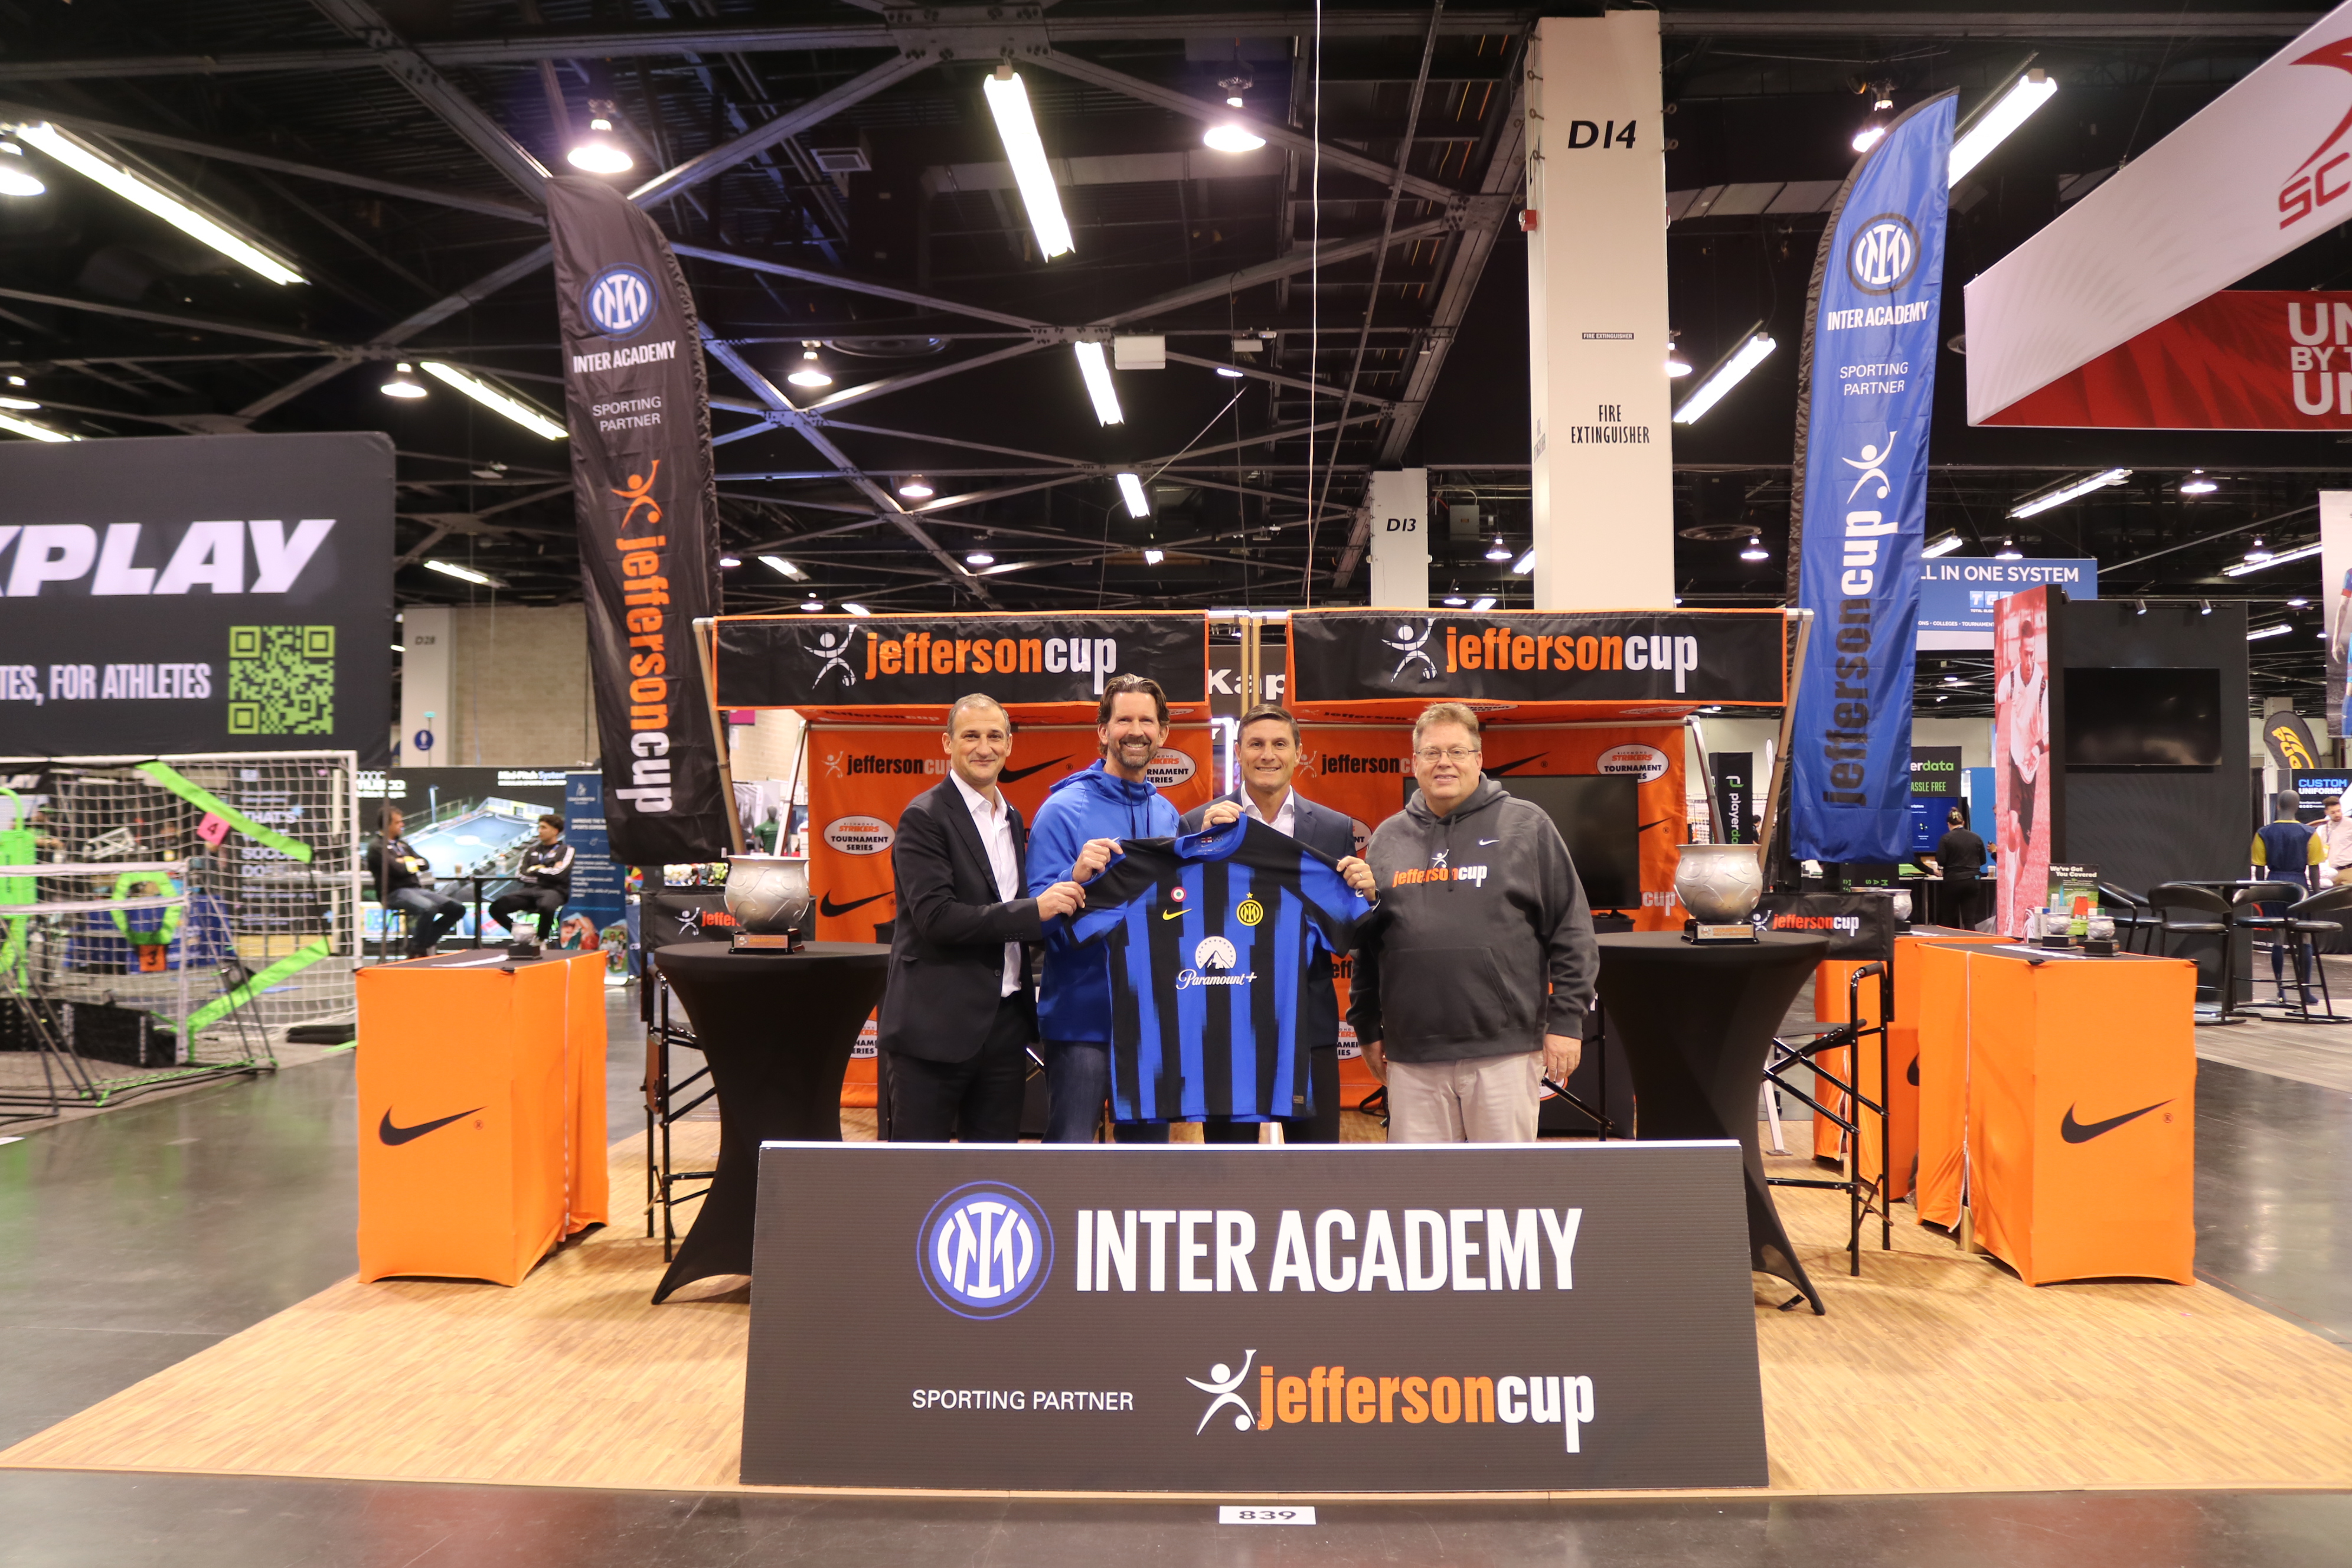 THE JEFFERSON CUP GETS INTER EFFECT. INTER ACADEMY SET TO BE THE SPORTING  PARTNER OF ONE OF THE MAIN YOUTH SOCCER TOURNAMENTS IN THE UNITED STATES